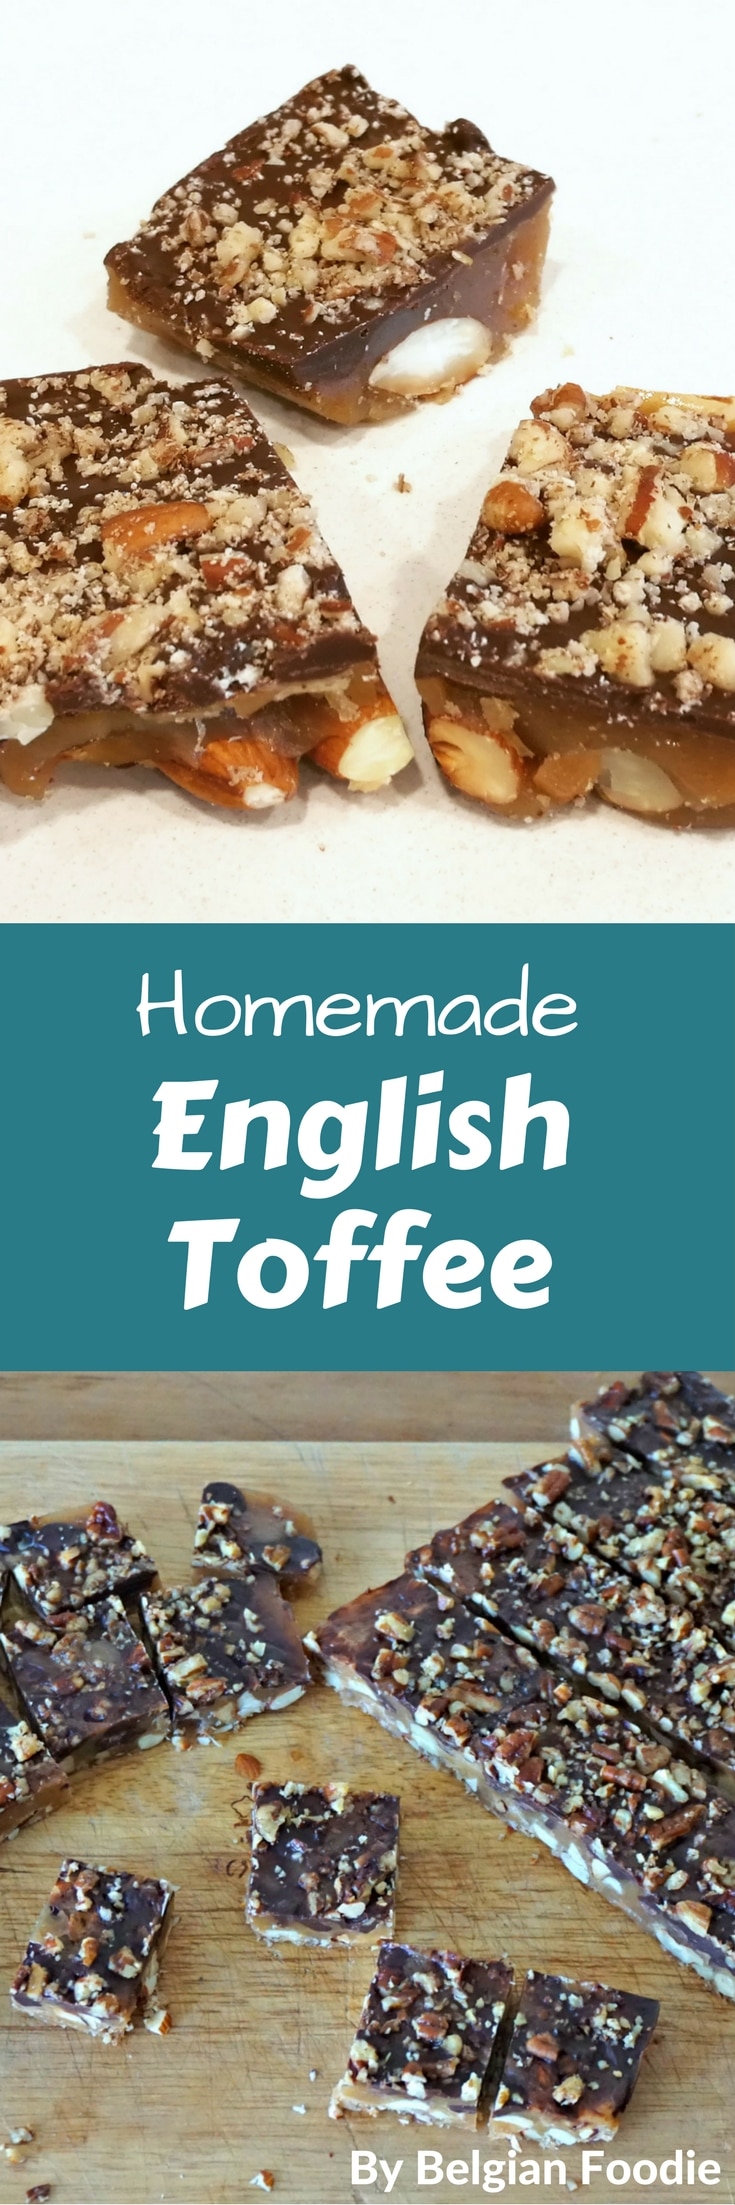 English Toffee Made at Home